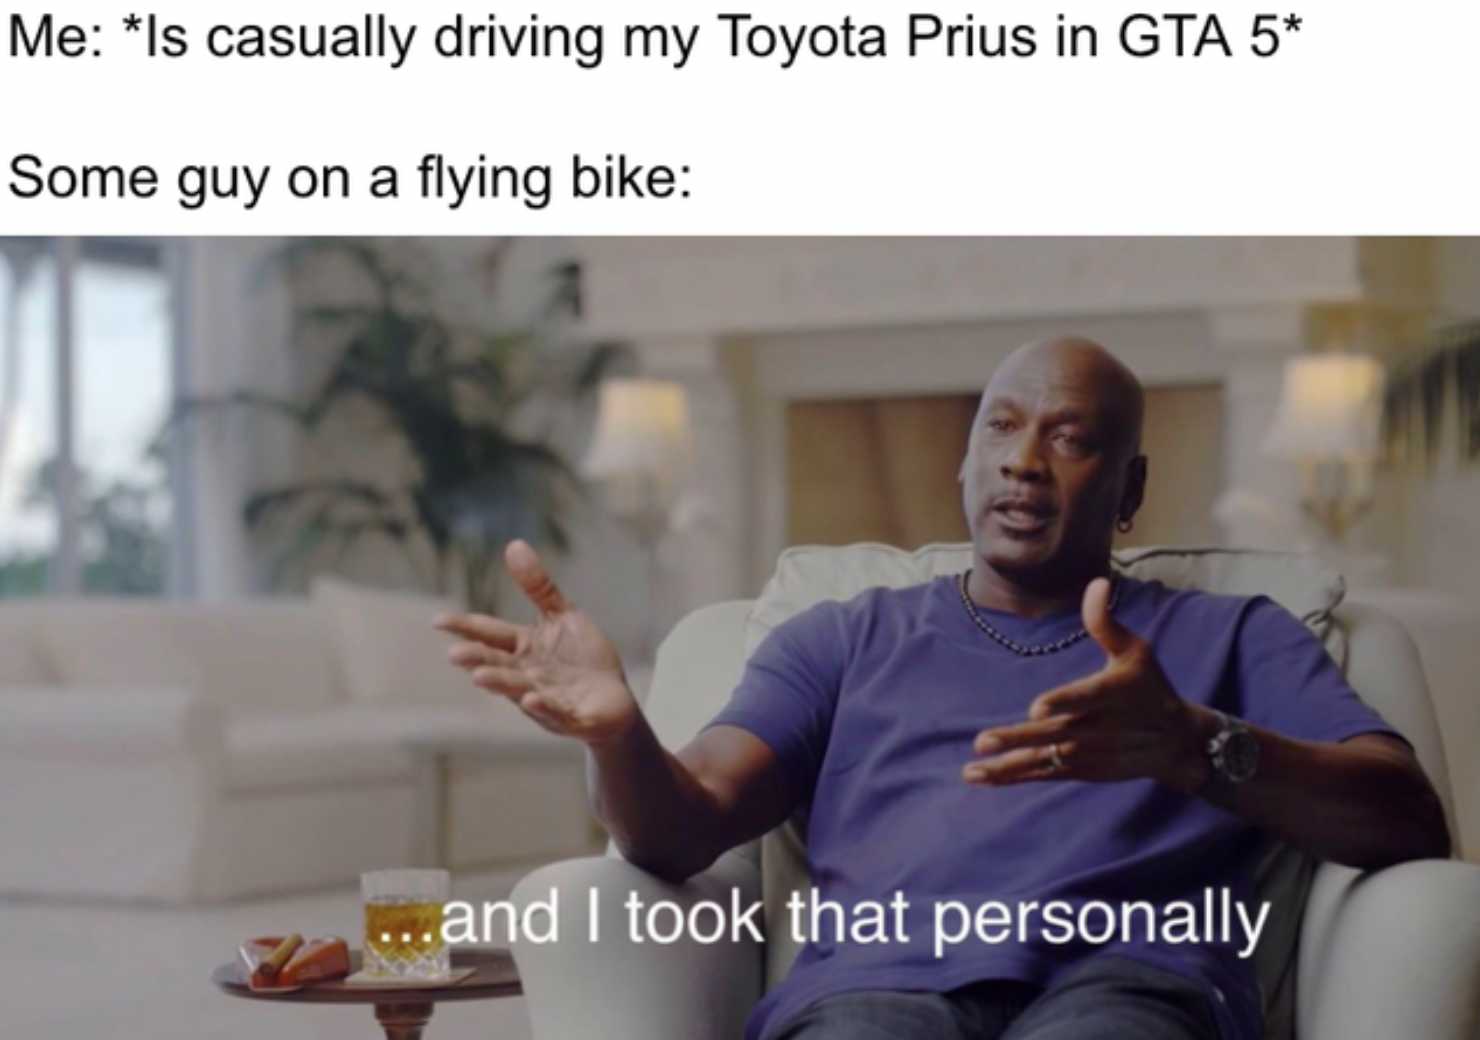 GTA V Memes - 123 that's enough for me meme - Me Is casually driving my Toyota Prius in Gta 5 Some guy on a flying bike 7 ...and I took that personally